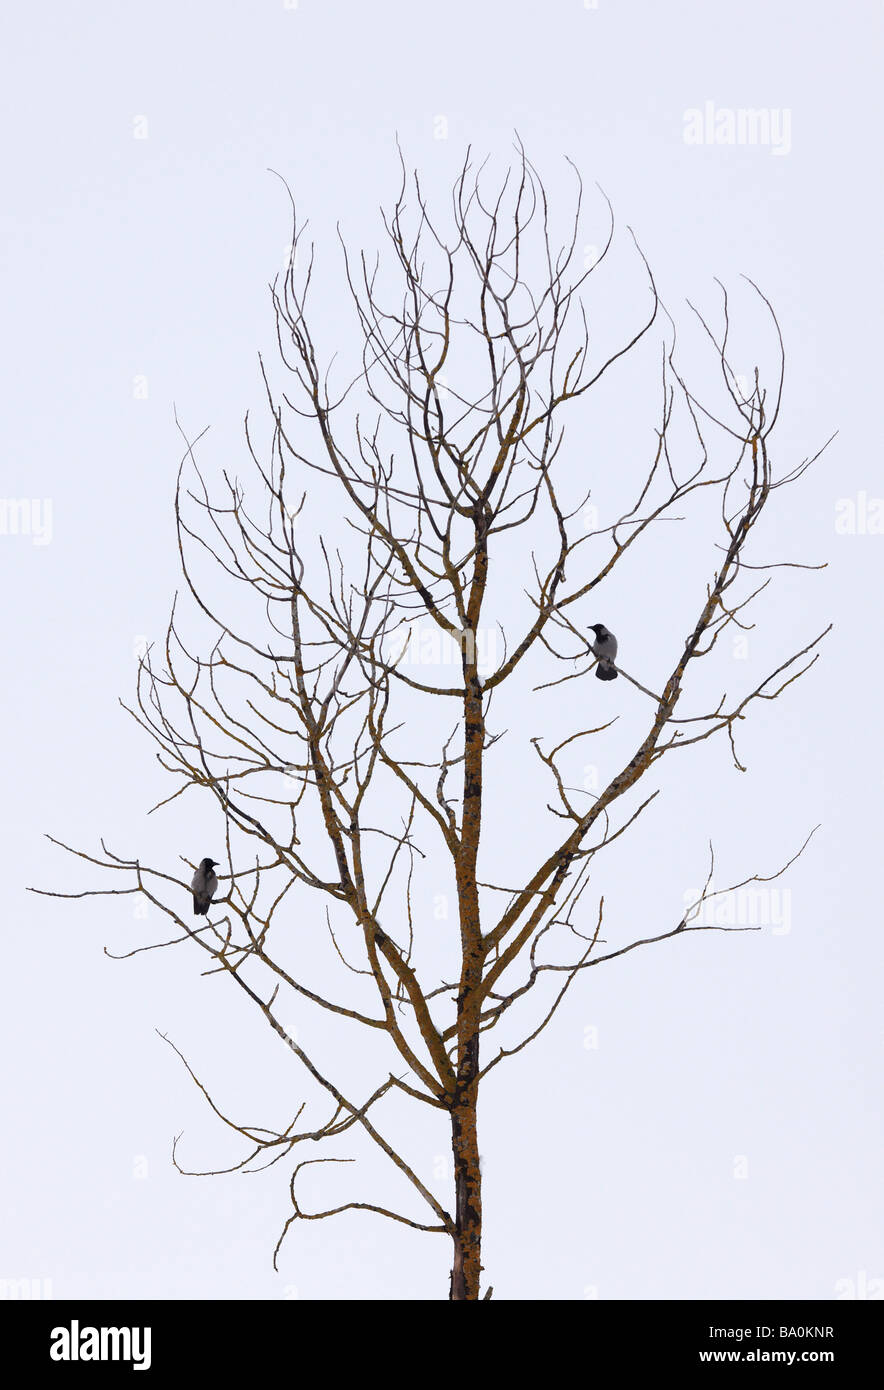 Crows in a barren tree Stock Photo